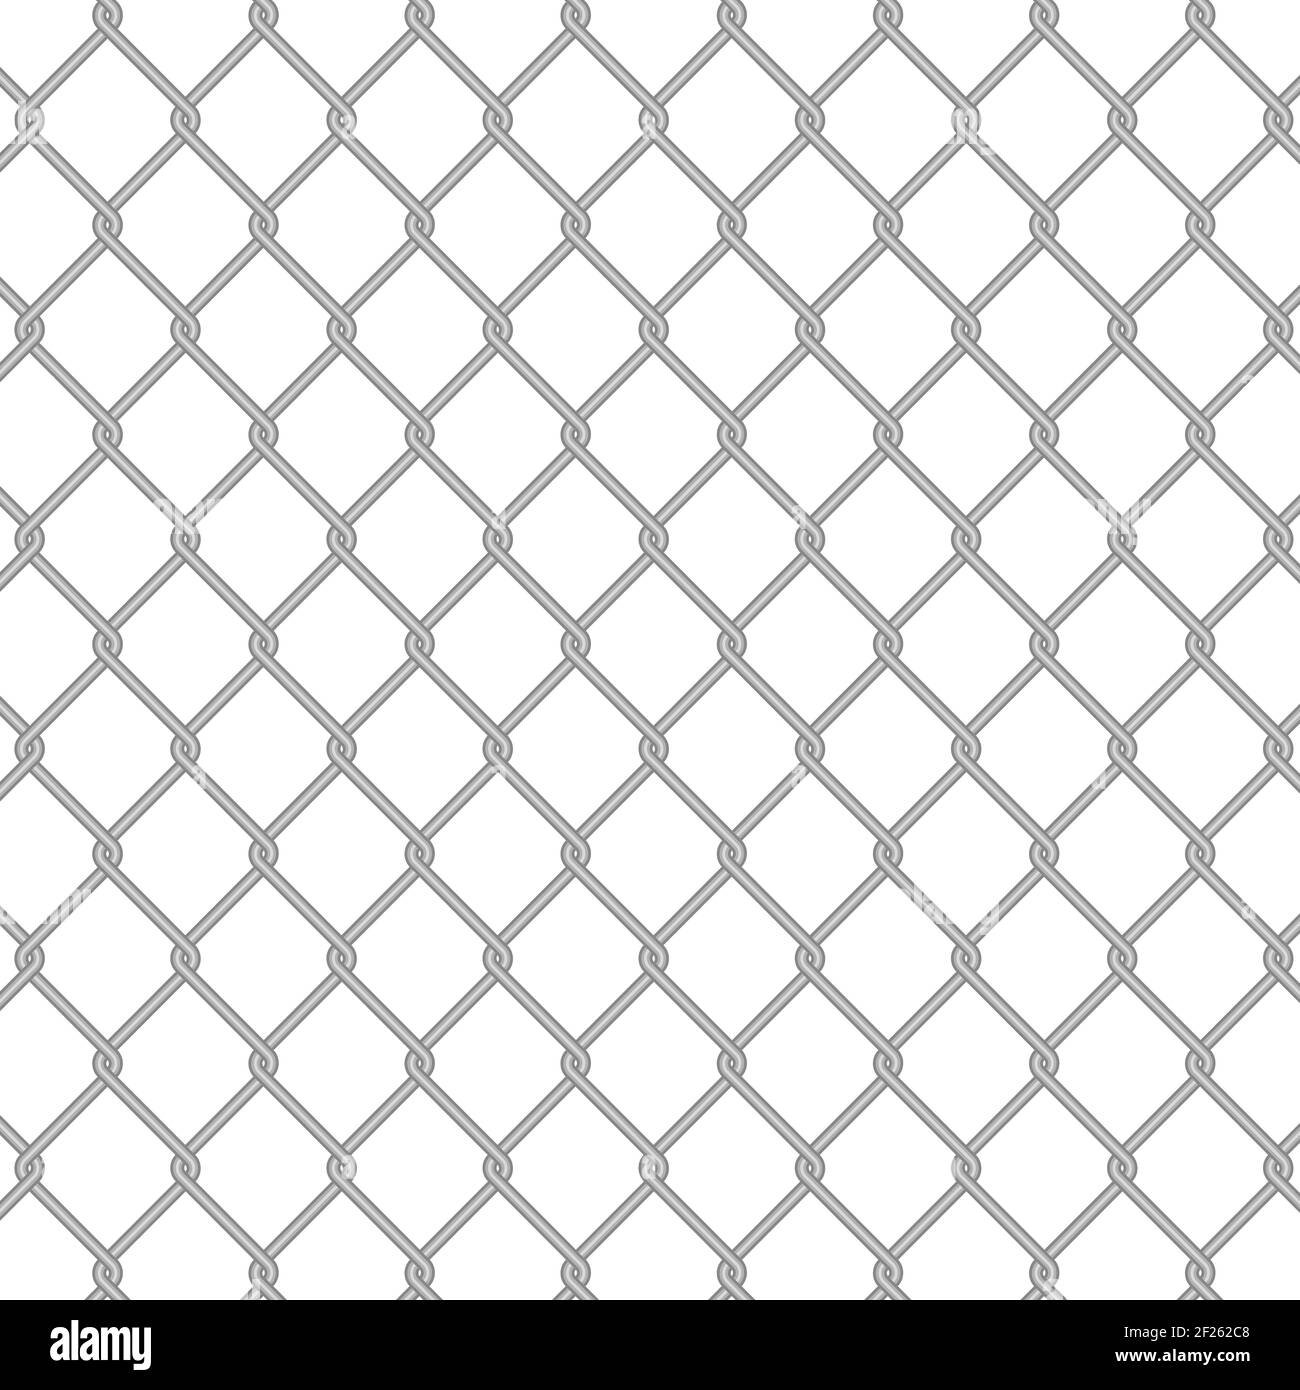 Chain link fence wire mesh steel metal. Fence section. 3D illustration isolated on white. Stock Photo